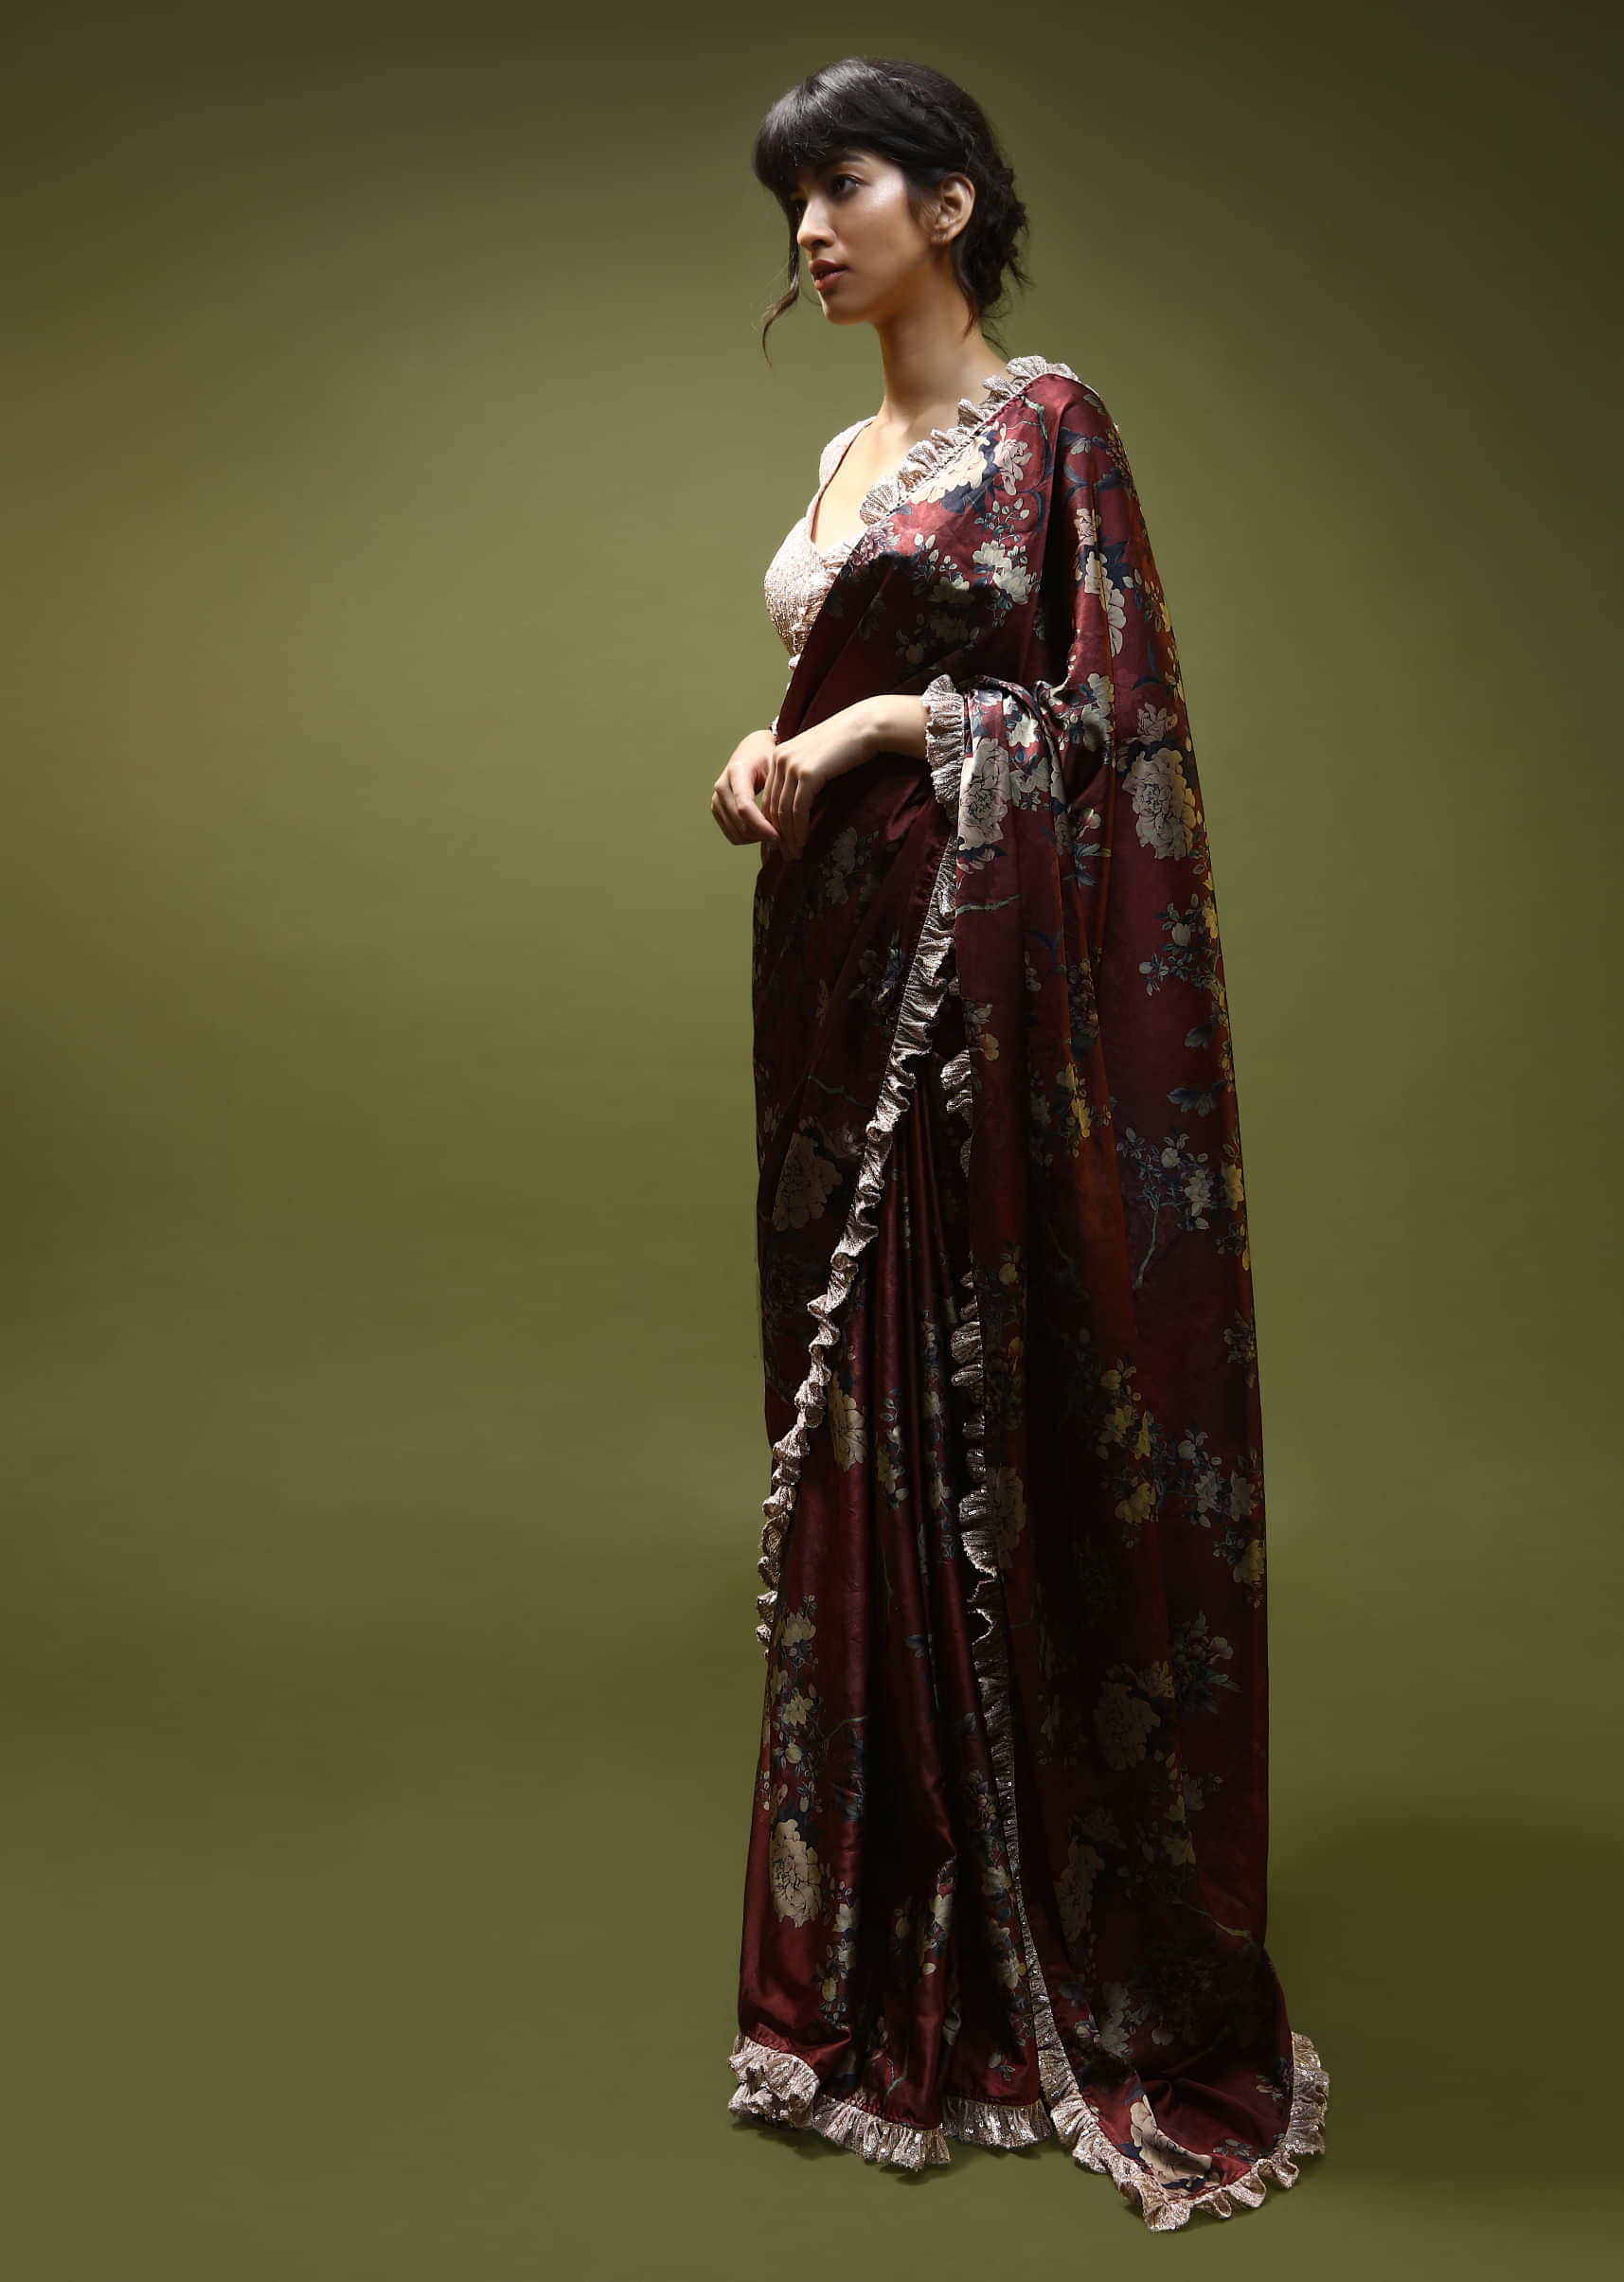 Burgundy Red Saree In Satin With Floral Print And Contrasting Peach Sequins Ruffle On The Border And Blouse